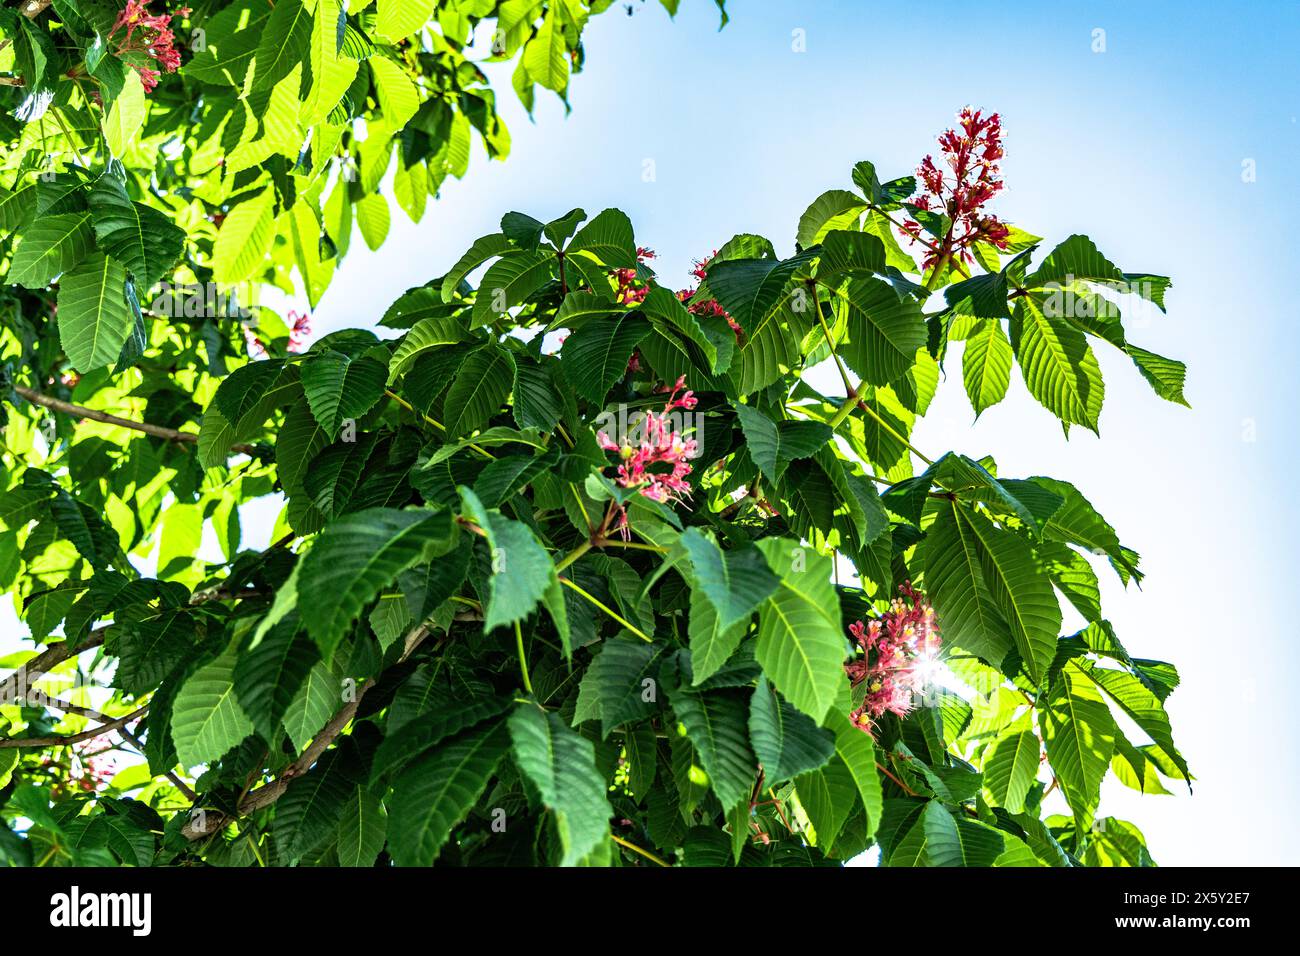 Vibrant pink flowers blooming on the Aesculus x carnea tree in springtime. glimpse of nature's beauty in the form of pink chestnut blossoms Stock Photo